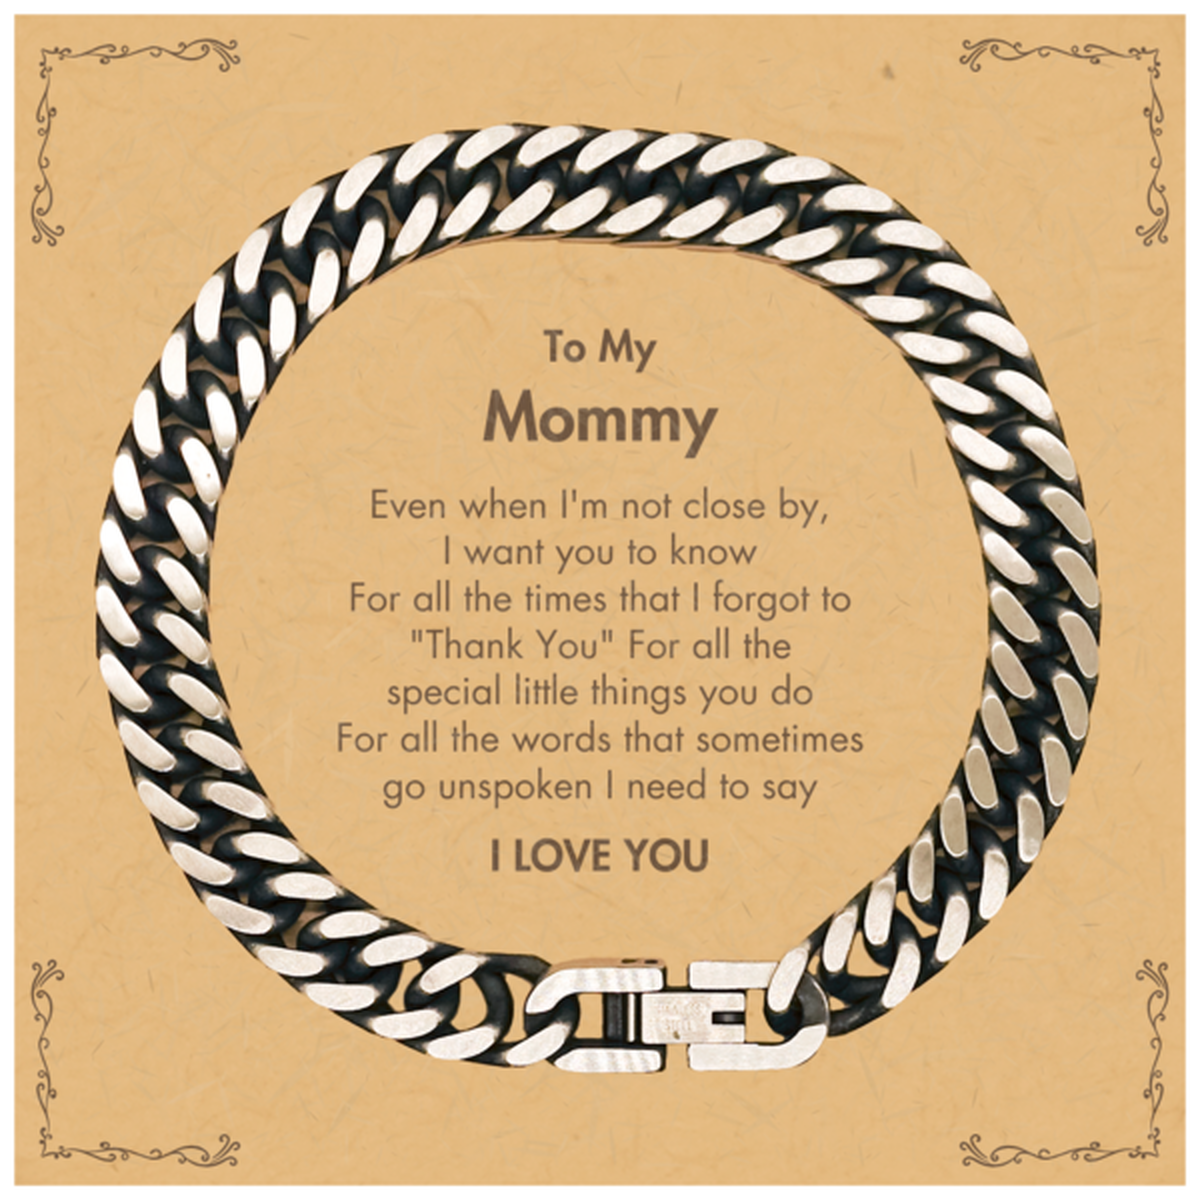 Thank You Gifts for Mommy, Keepsake Cuban Link Chain Bracelet Gifts for Mommy Birthday Mother's day Father's Day Mommy For all the words That sometimes go unspoken I need to say I LOVE YOU